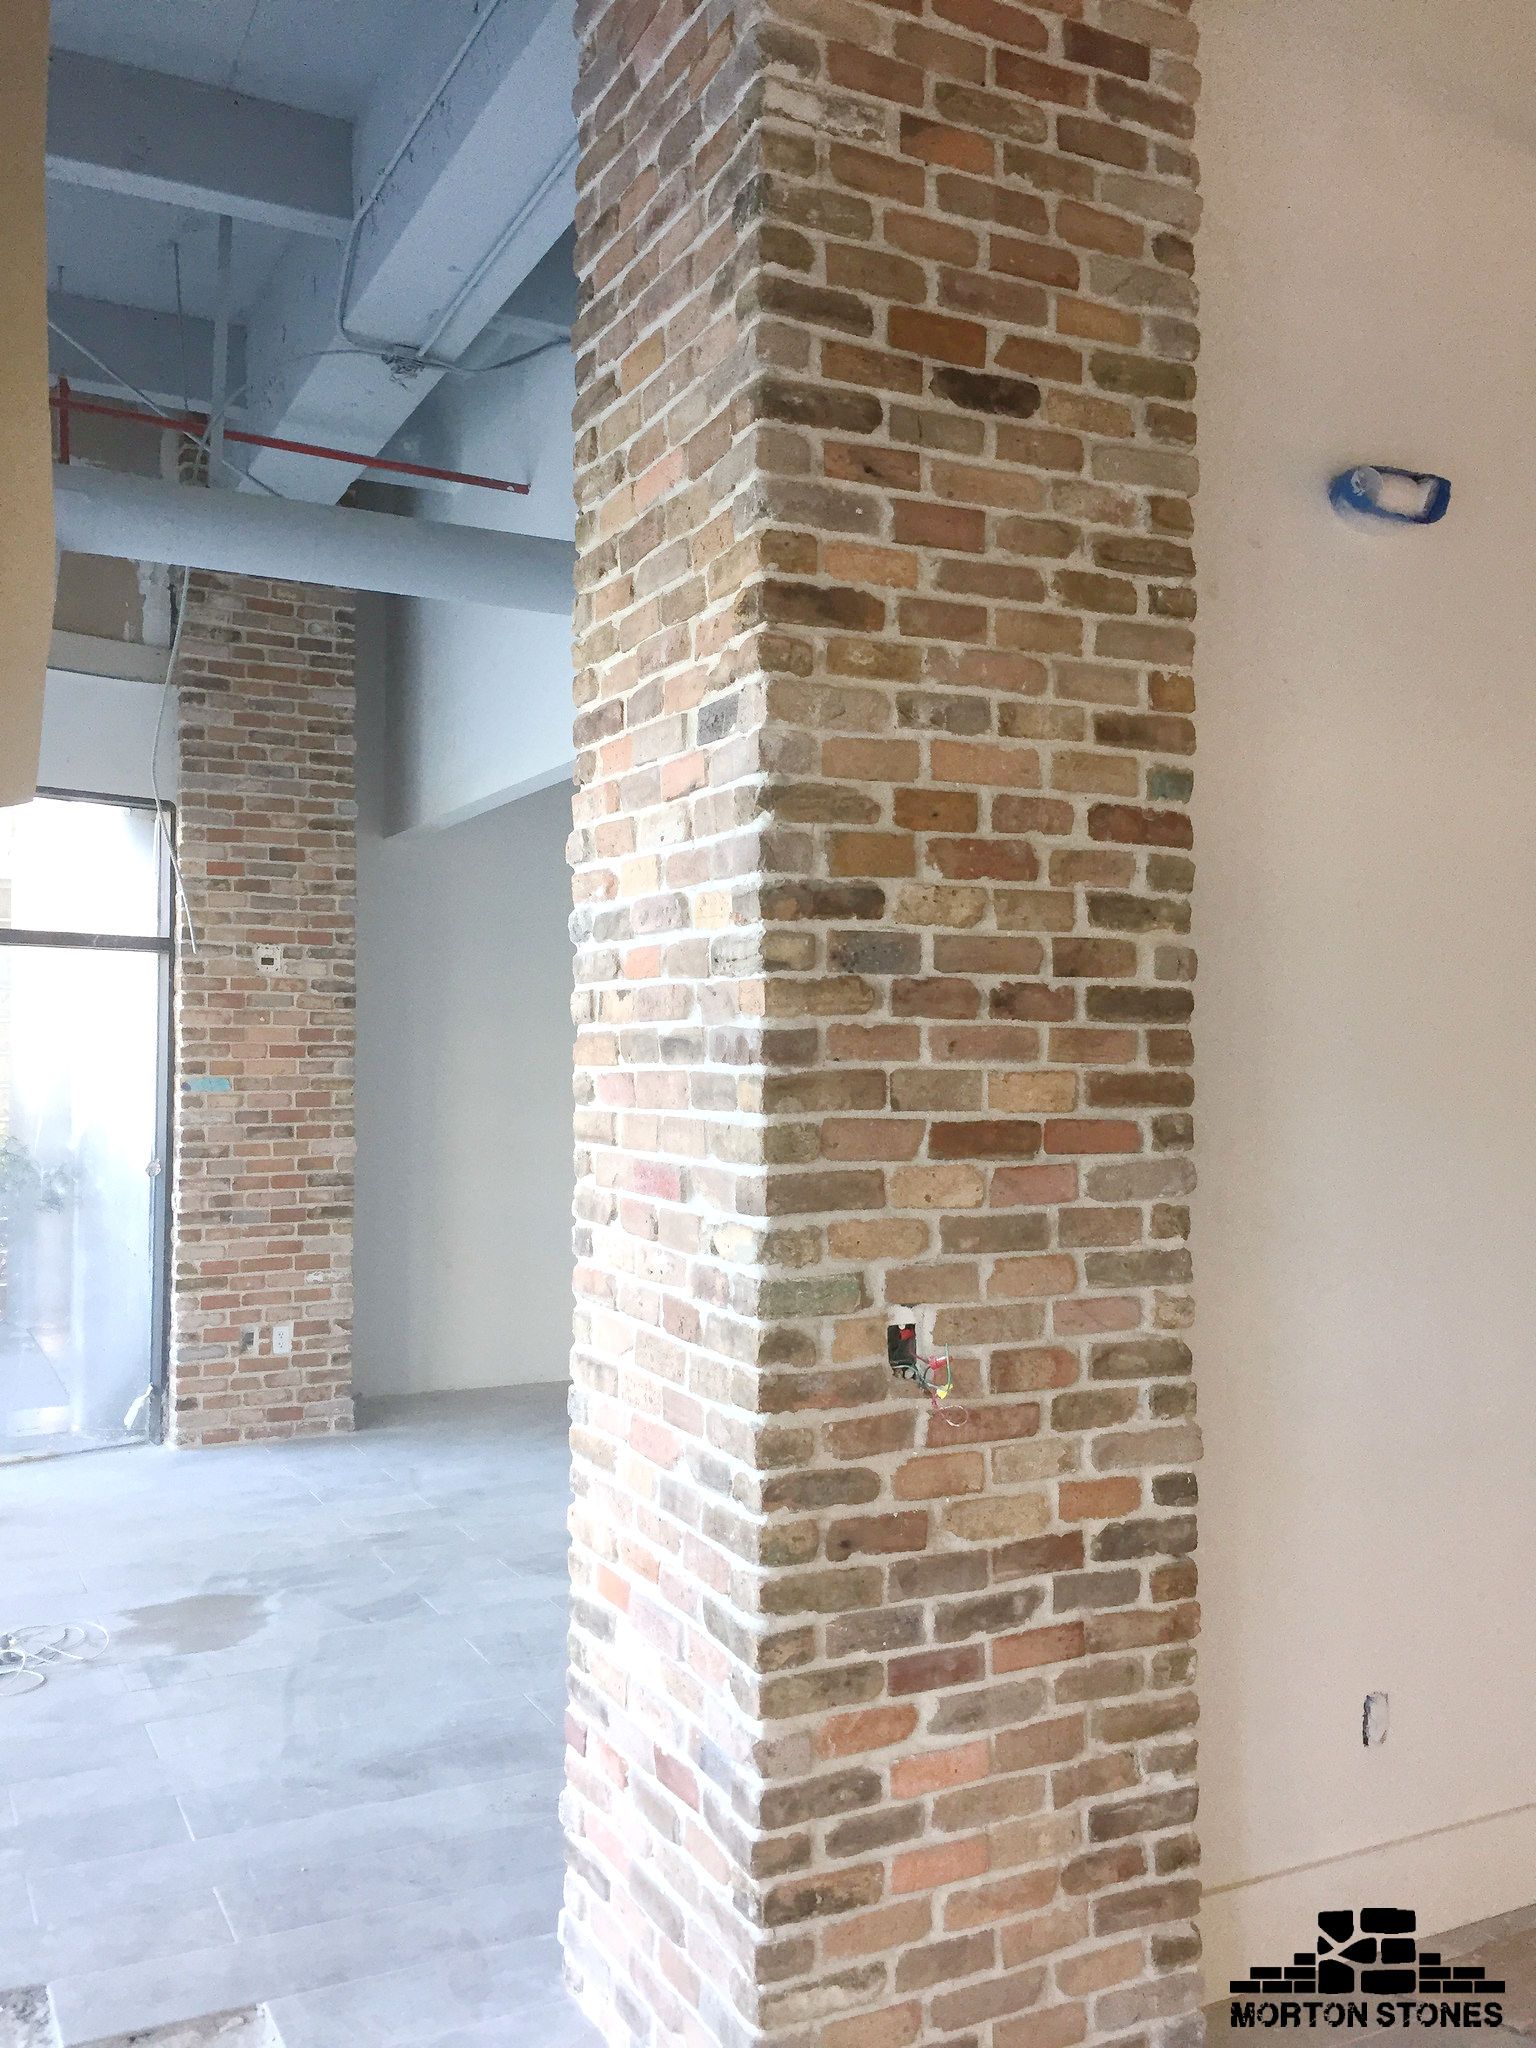 Single Brick Fireplace Awesome the Brick Veneer Columns are A Classic Accent Feature